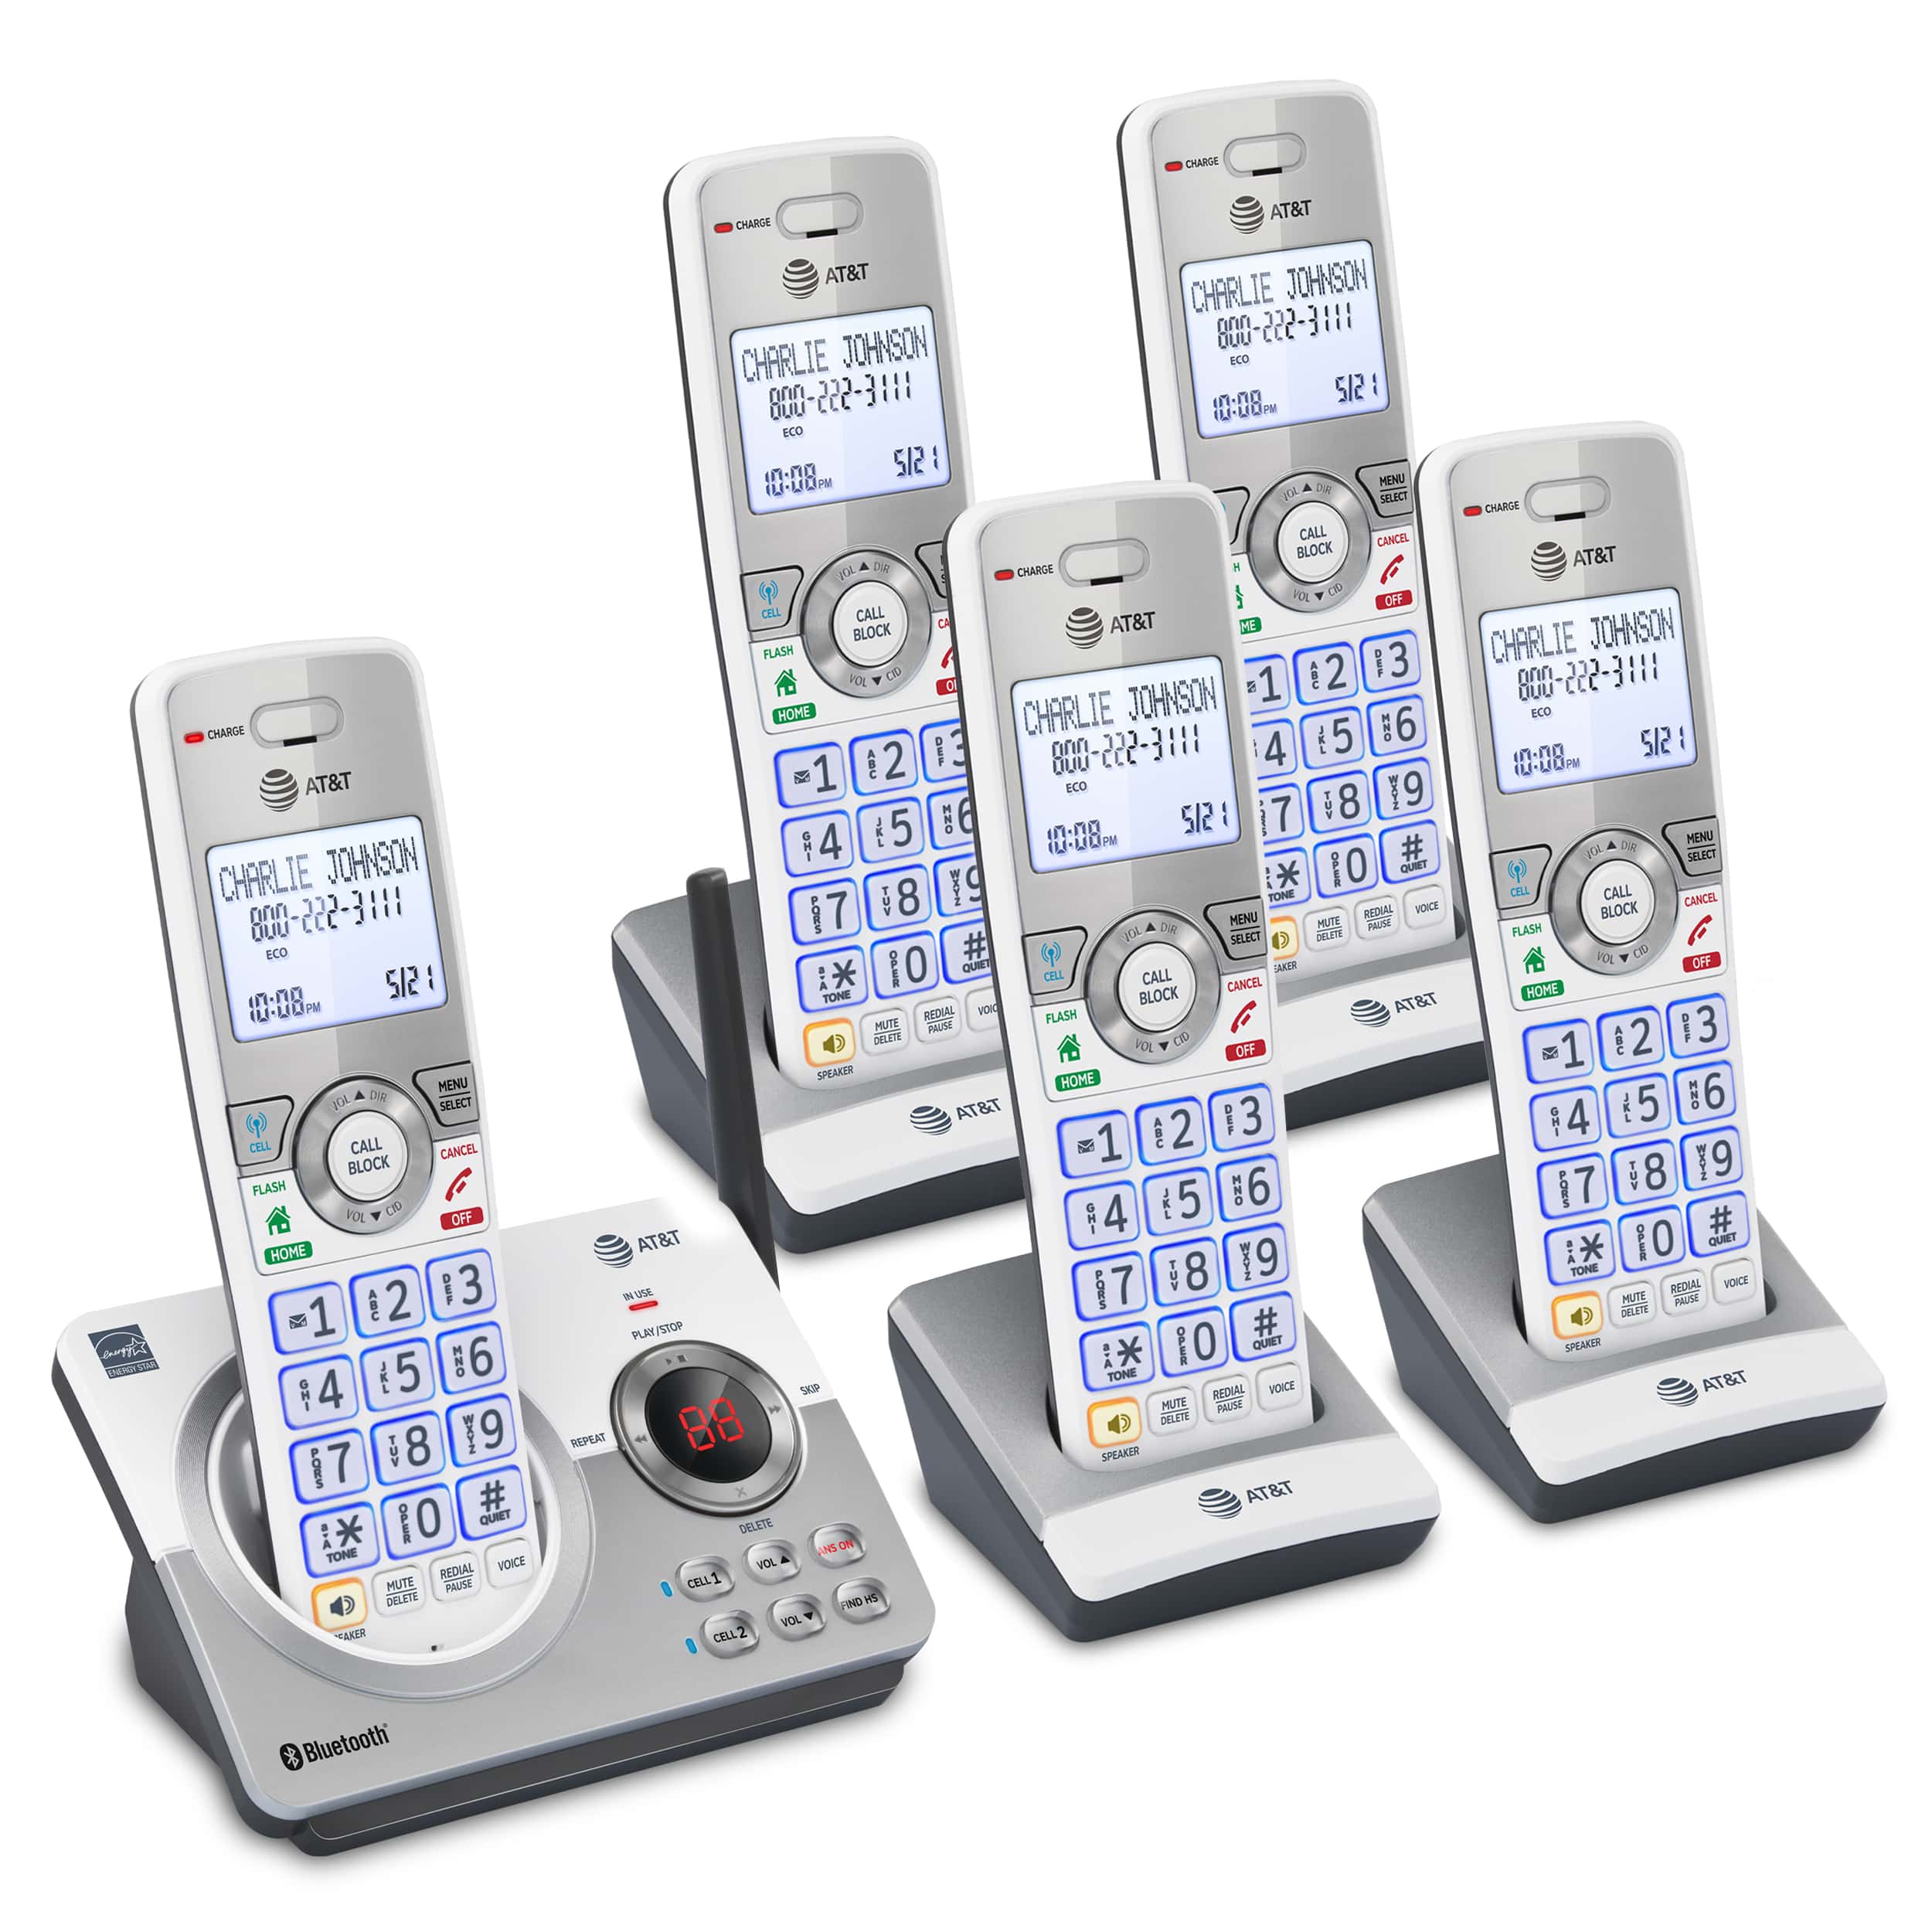 5-Handset Expandable Cordless Phone with Unsurpassed Range, Bluetooth Connect to Cell™, Smart Call Blocker and Answering System (Champagne) - view 3